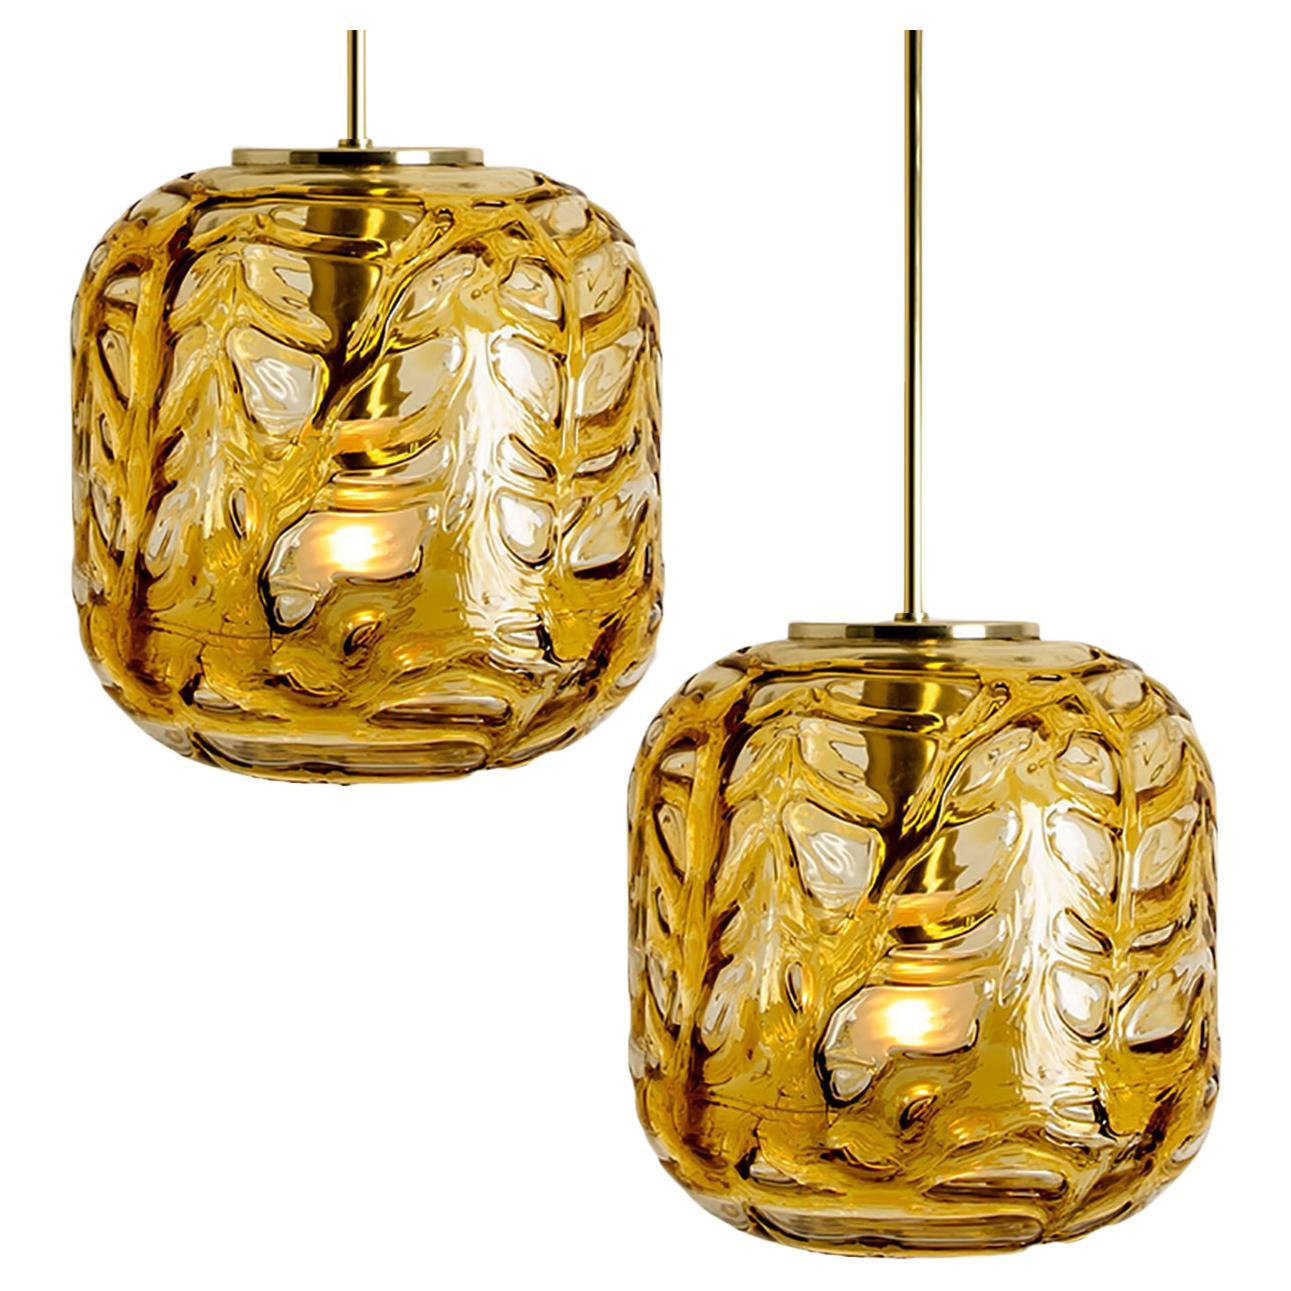 Exceptional Pair of Amber Murano Glass Pendant Lights Venini Style, 1970